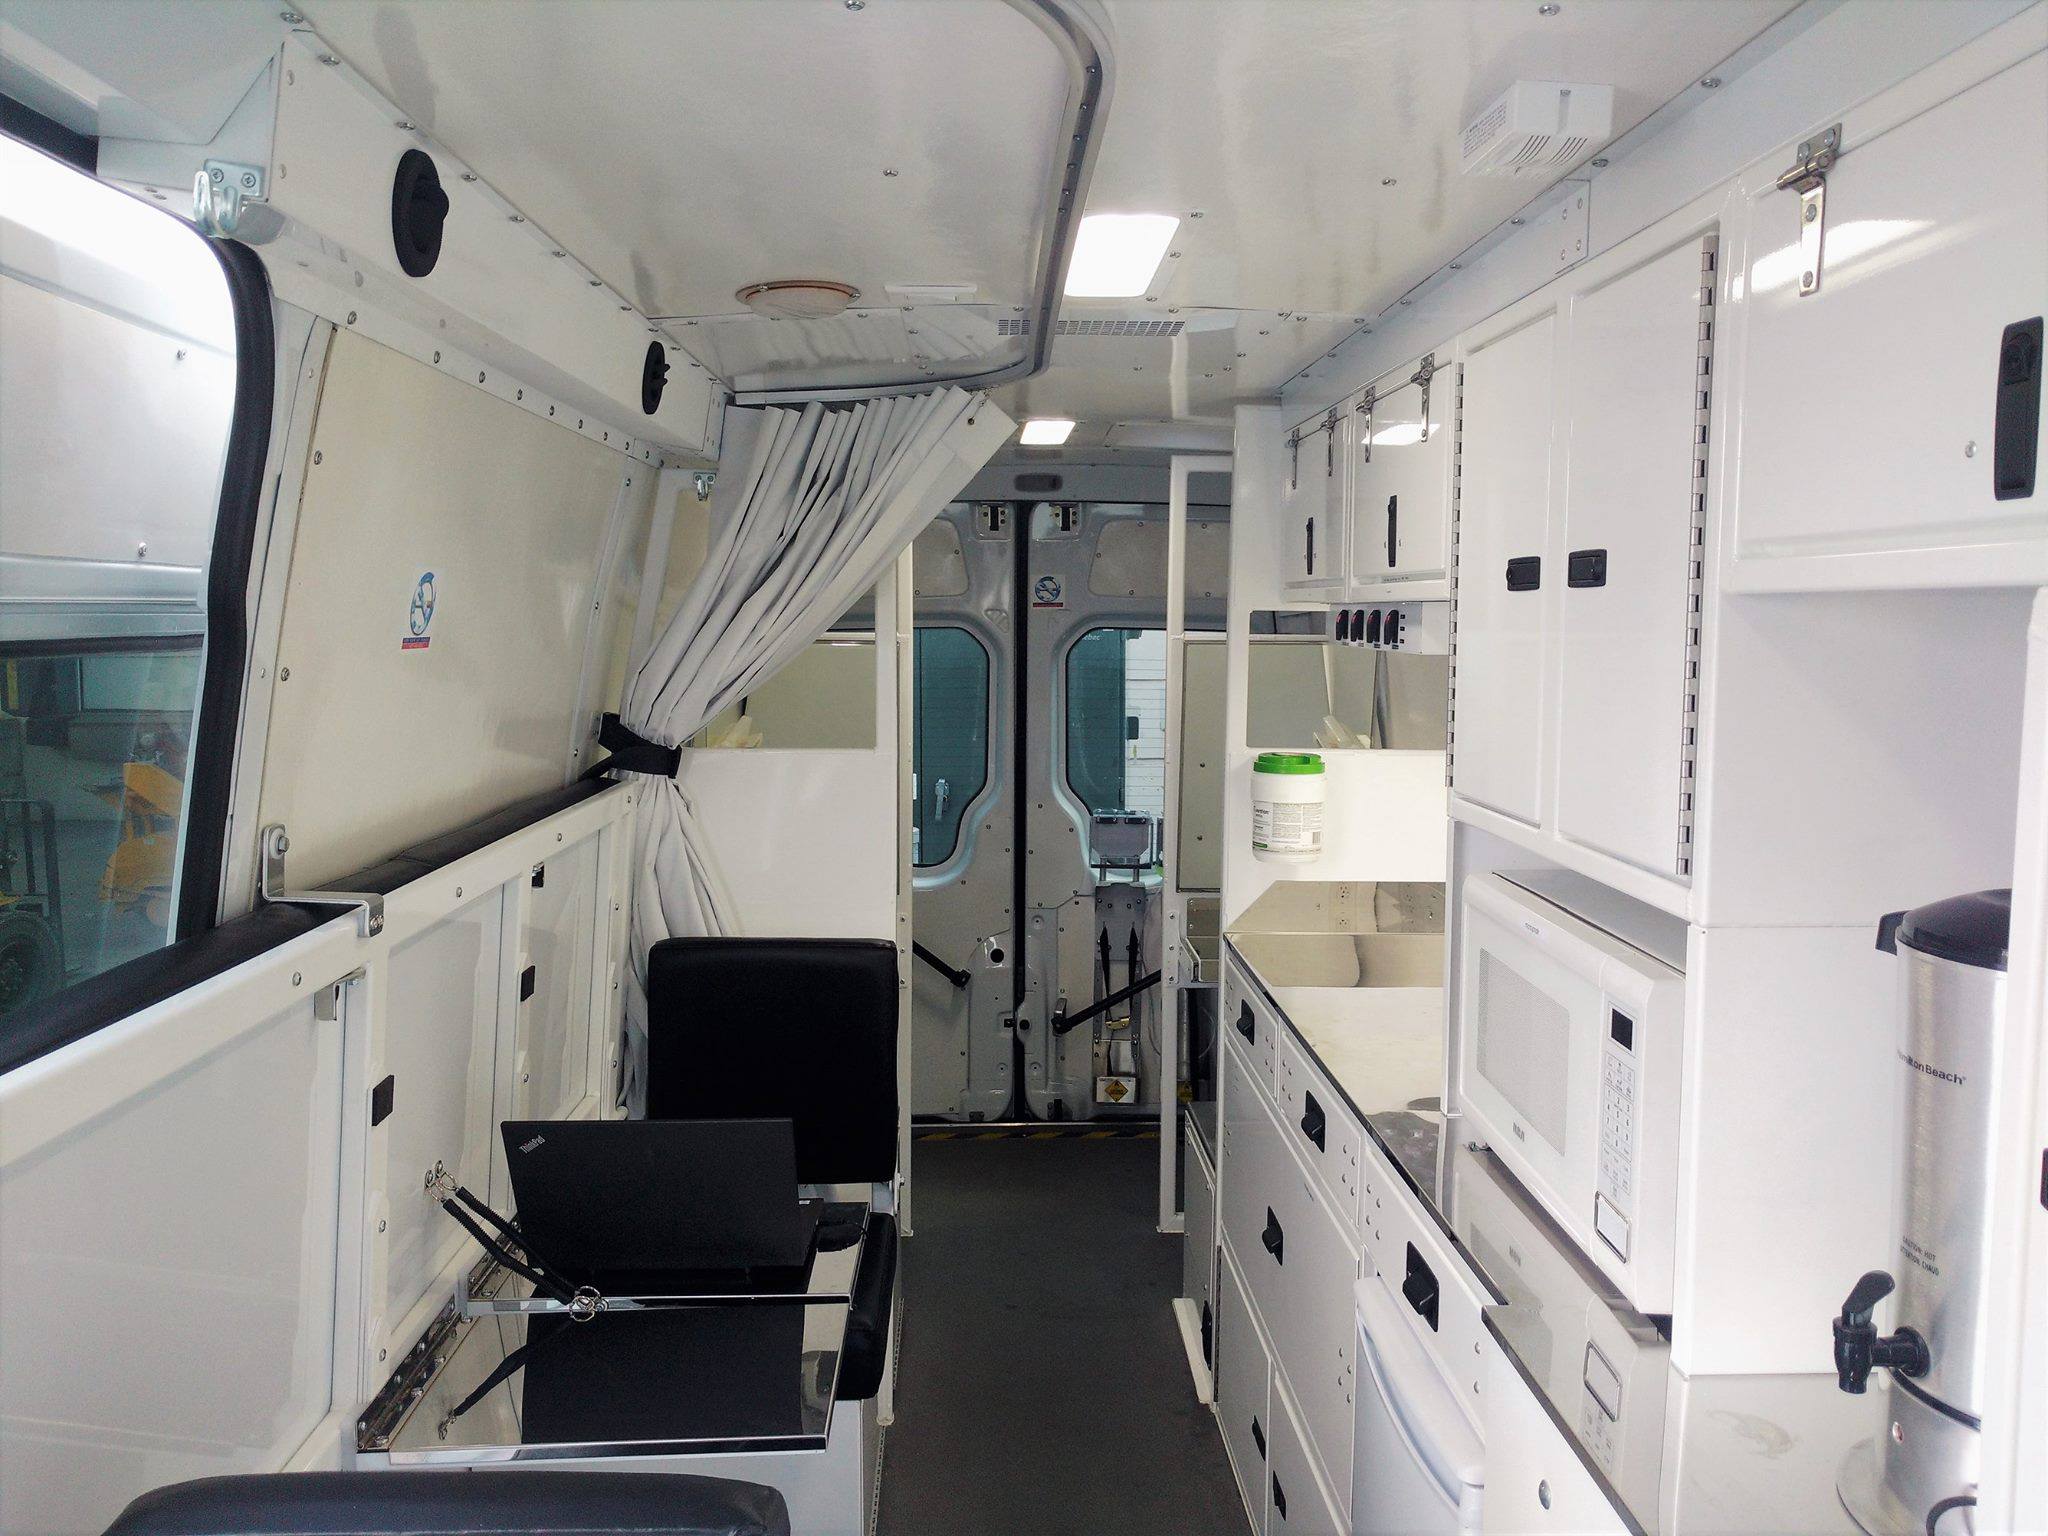 Photo of the inside of a large vehicle used for mobile safe injection services in Montreal, Canada